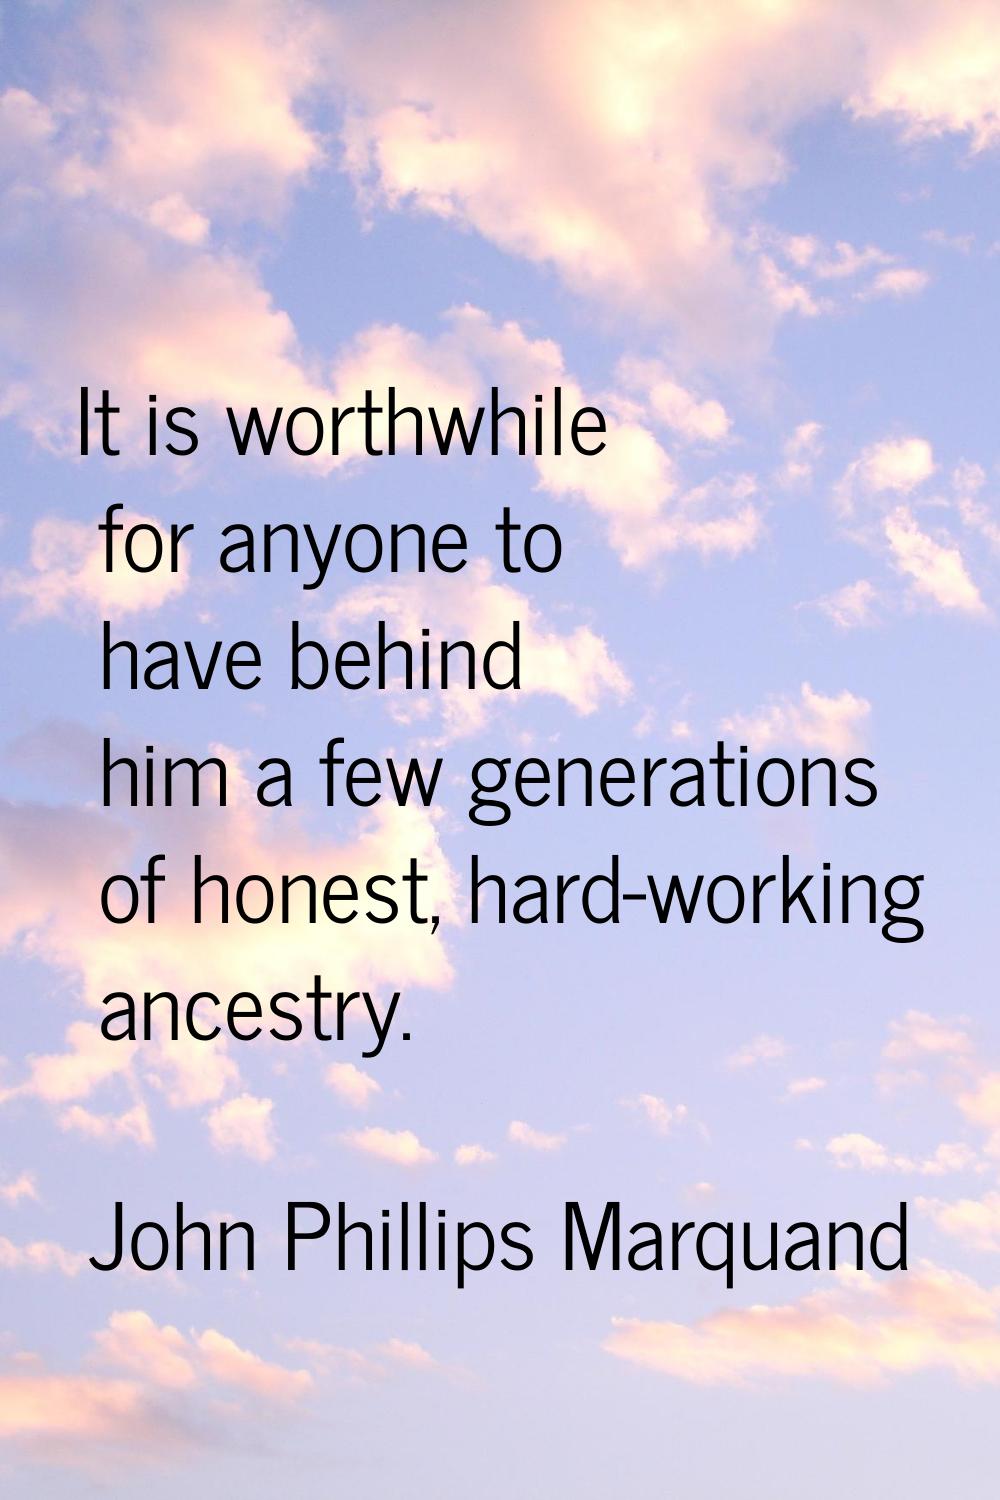 It is worthwhile for anyone to have behind him a few generations of honest, hard-working ancestry.